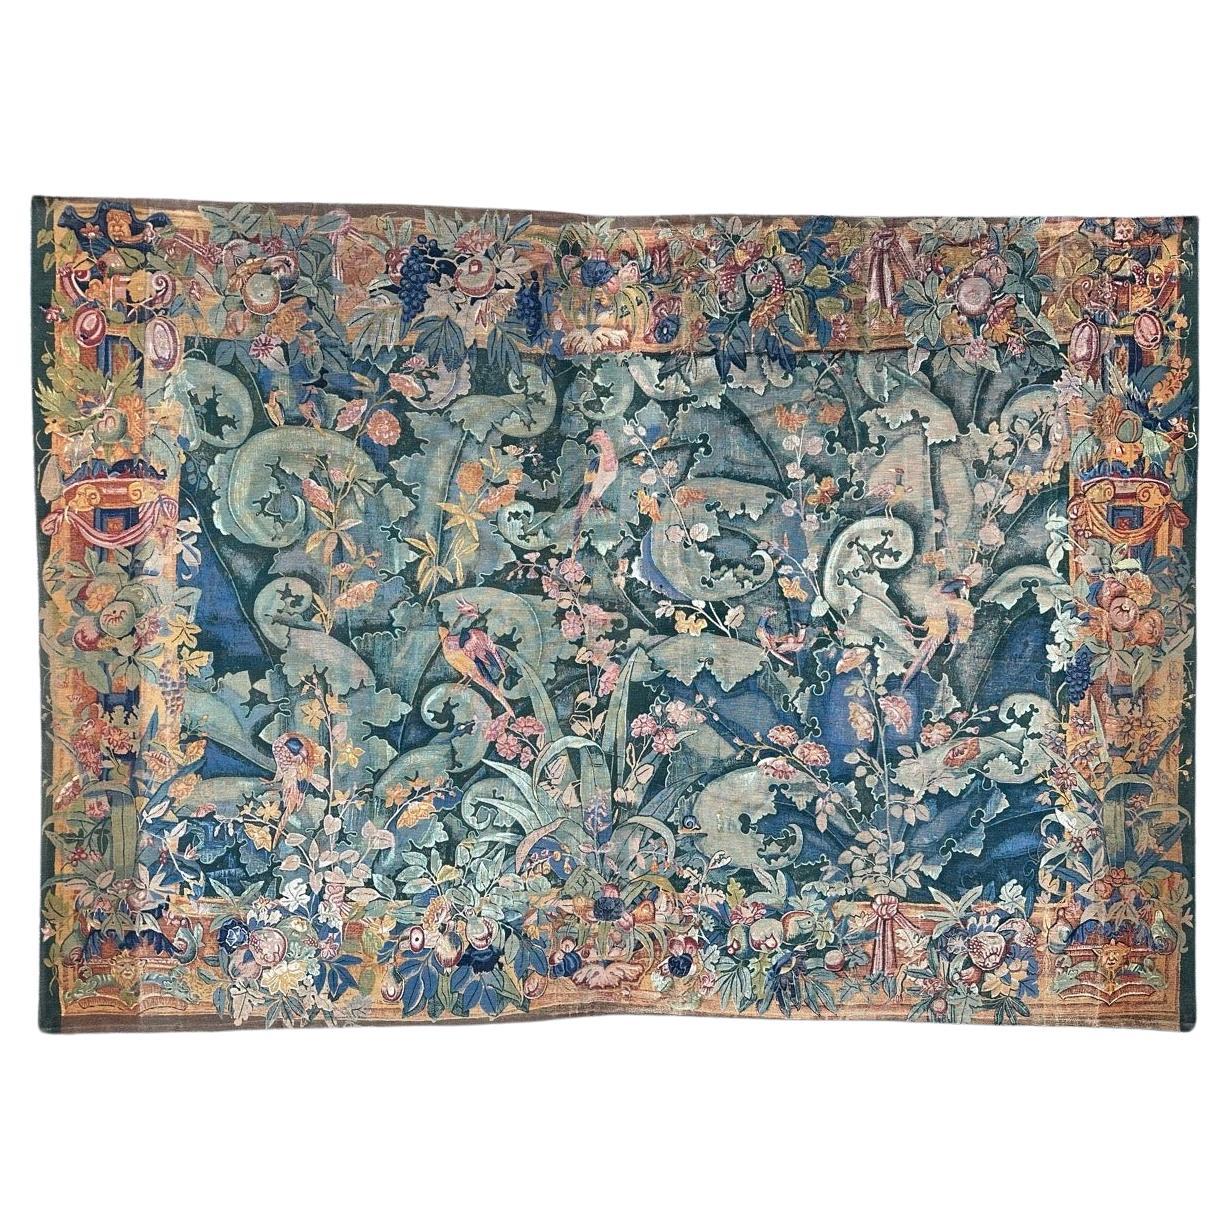 Bobyrug’s Nice mid century french 16th century style printed tapestry 